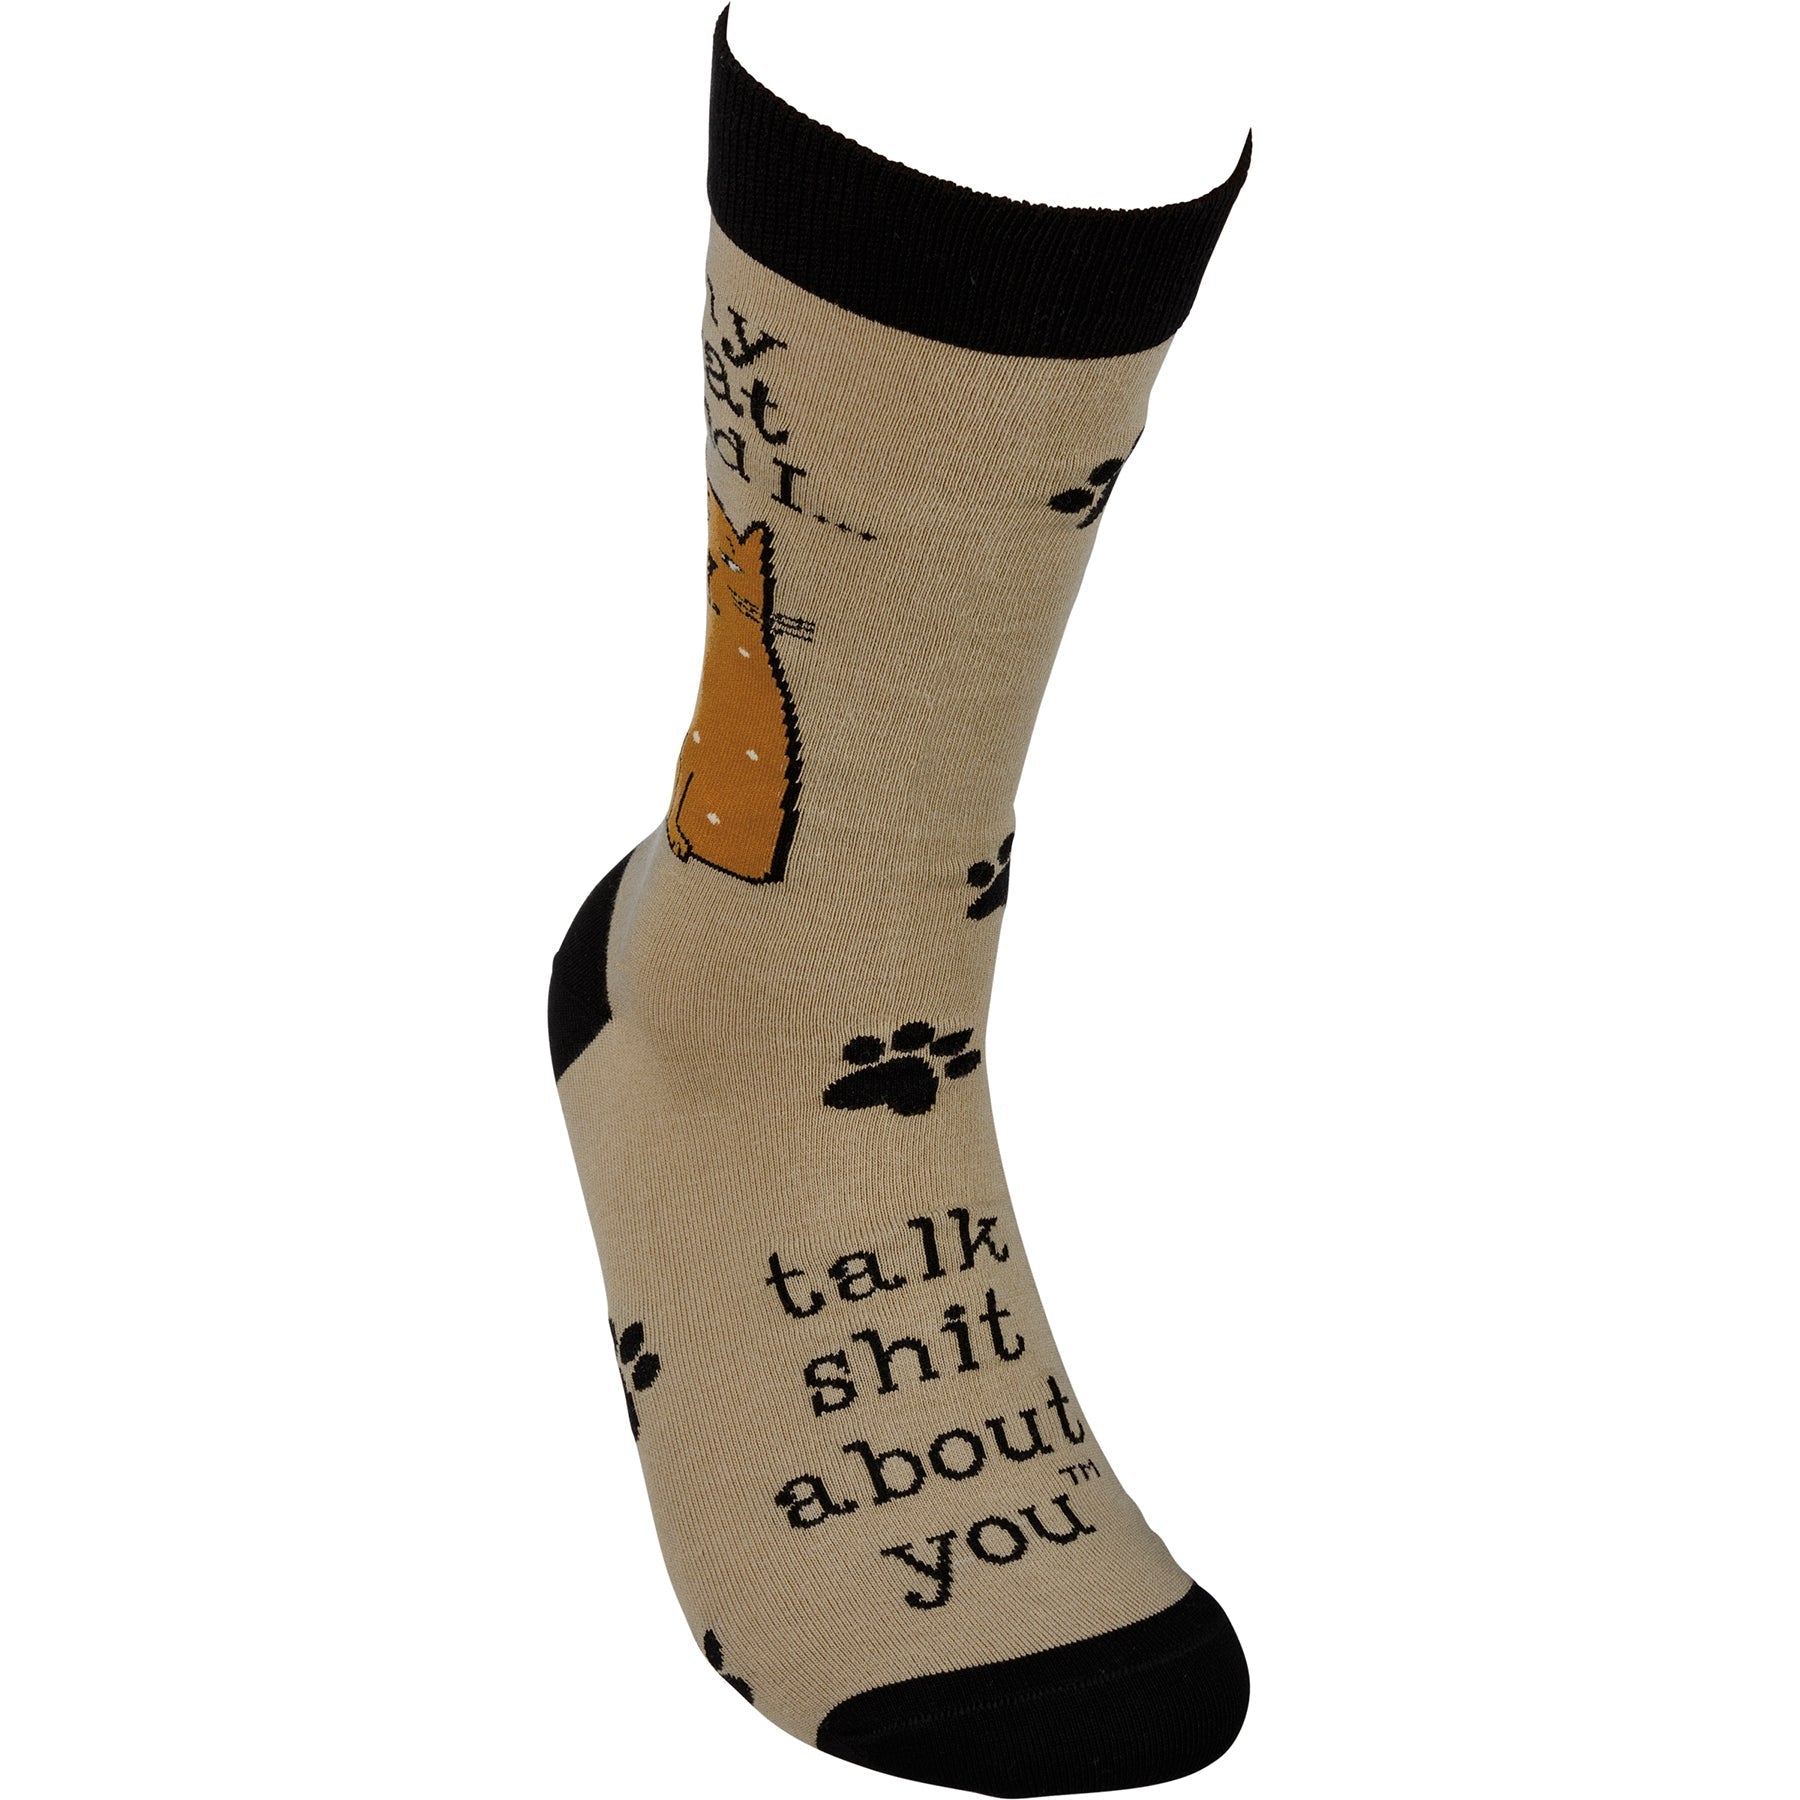 Cat Lover Socks Featuring The Words My Cat And I Talk S**t About You